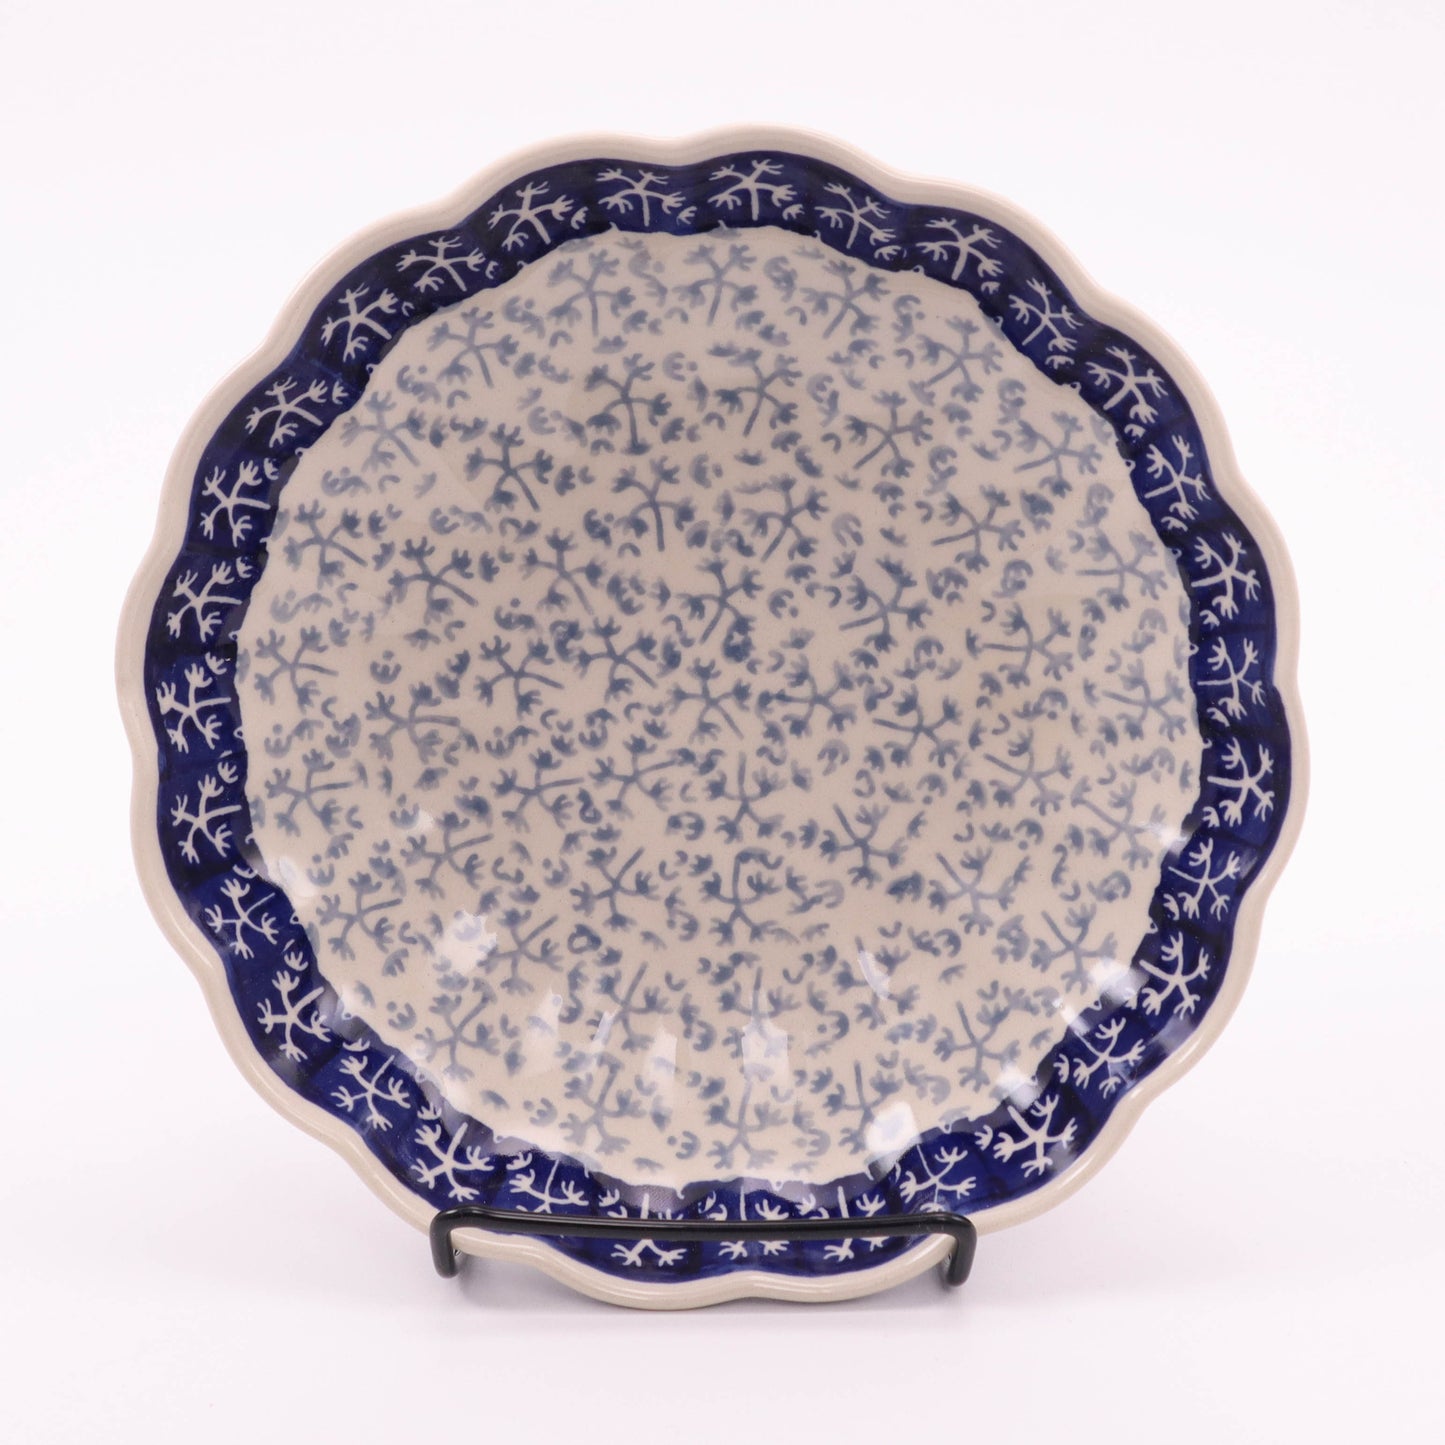 7.5" X 2" Scalloped Round Bowl.  Pattern: Frosted